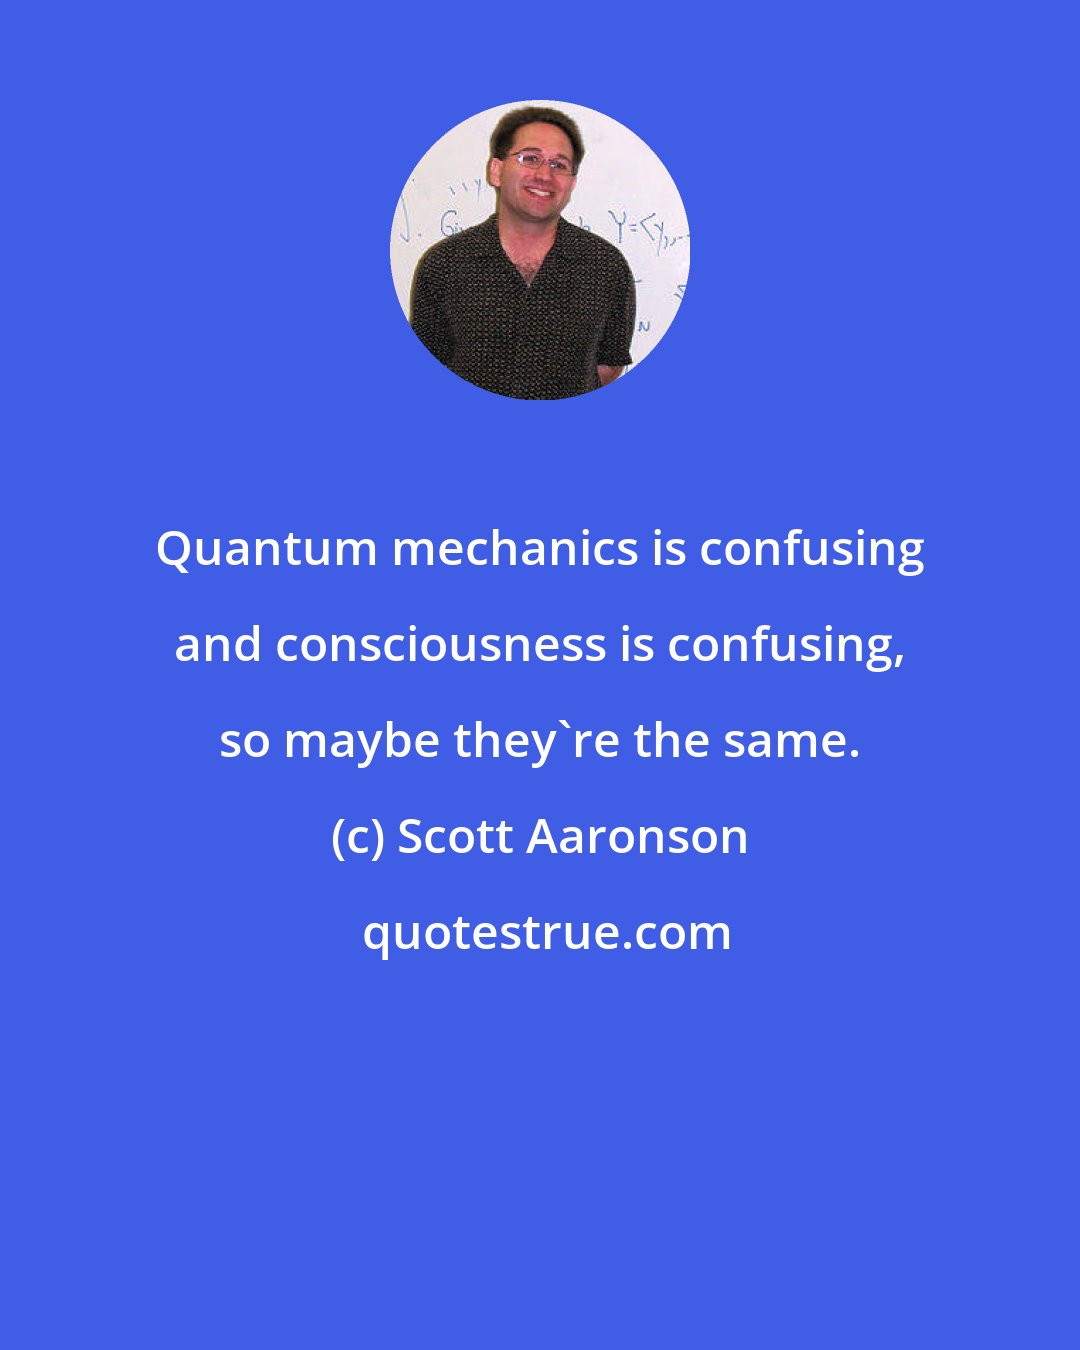 Scott Aaronson: Quantum mechanics is confusing and consciousness is confusing, so maybe they're the same.